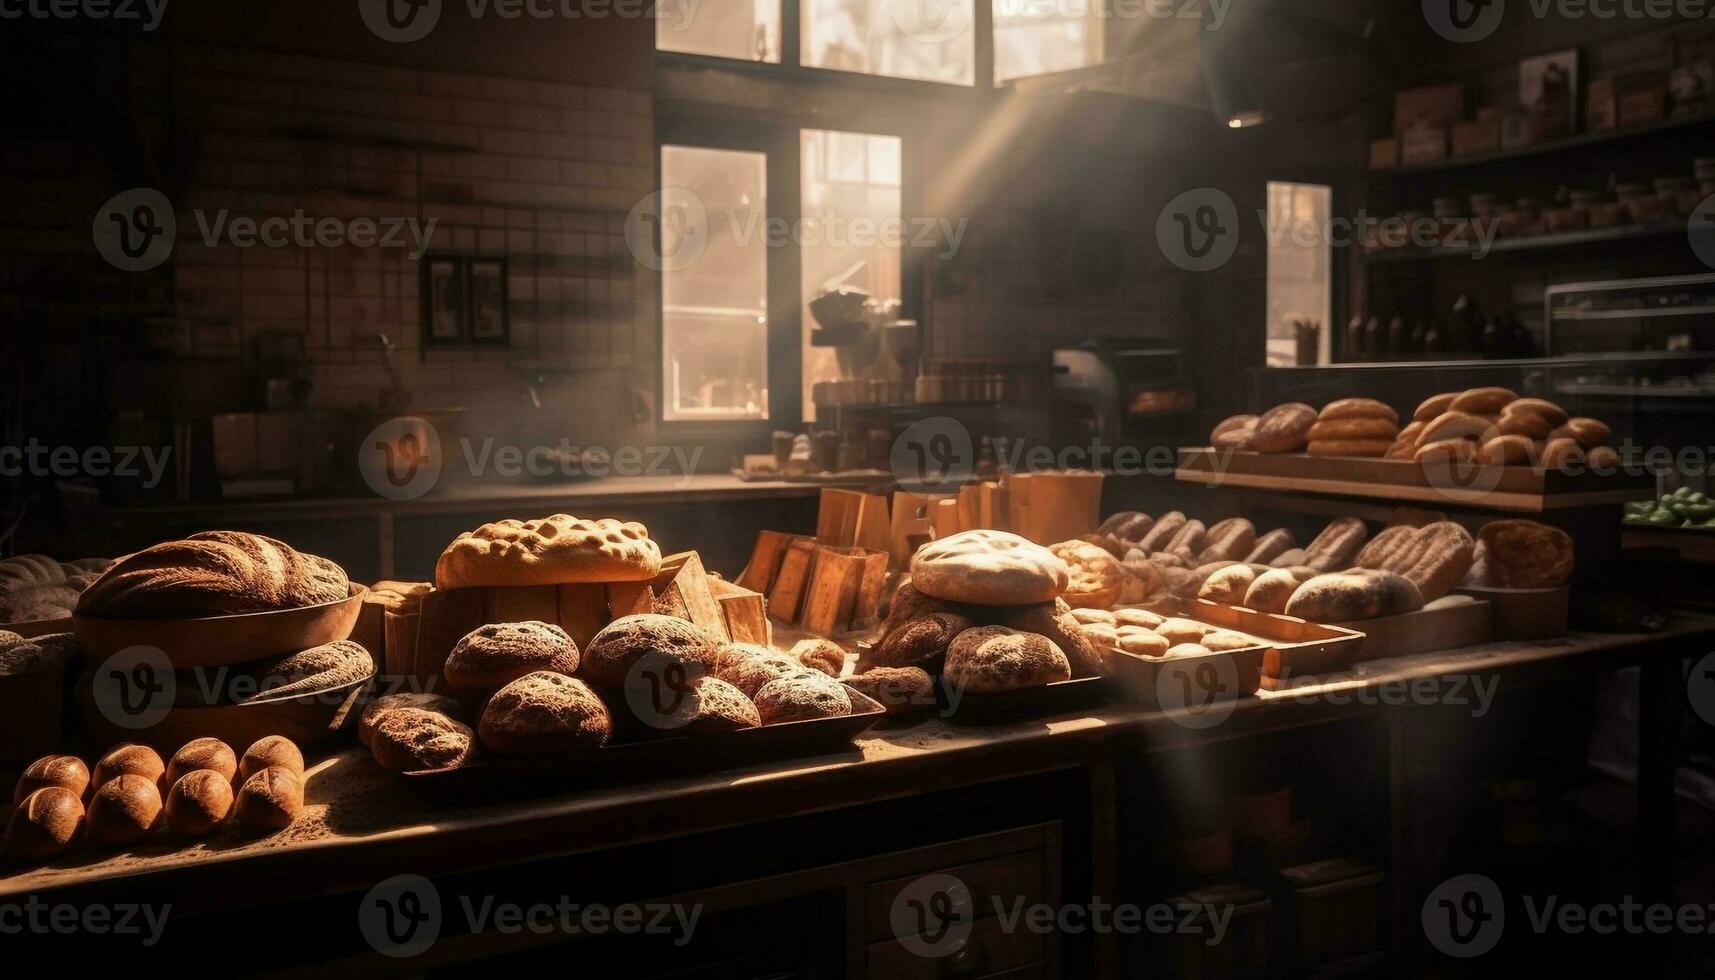 Freshly baked bread and pastries fill store shelves generated by AI photo